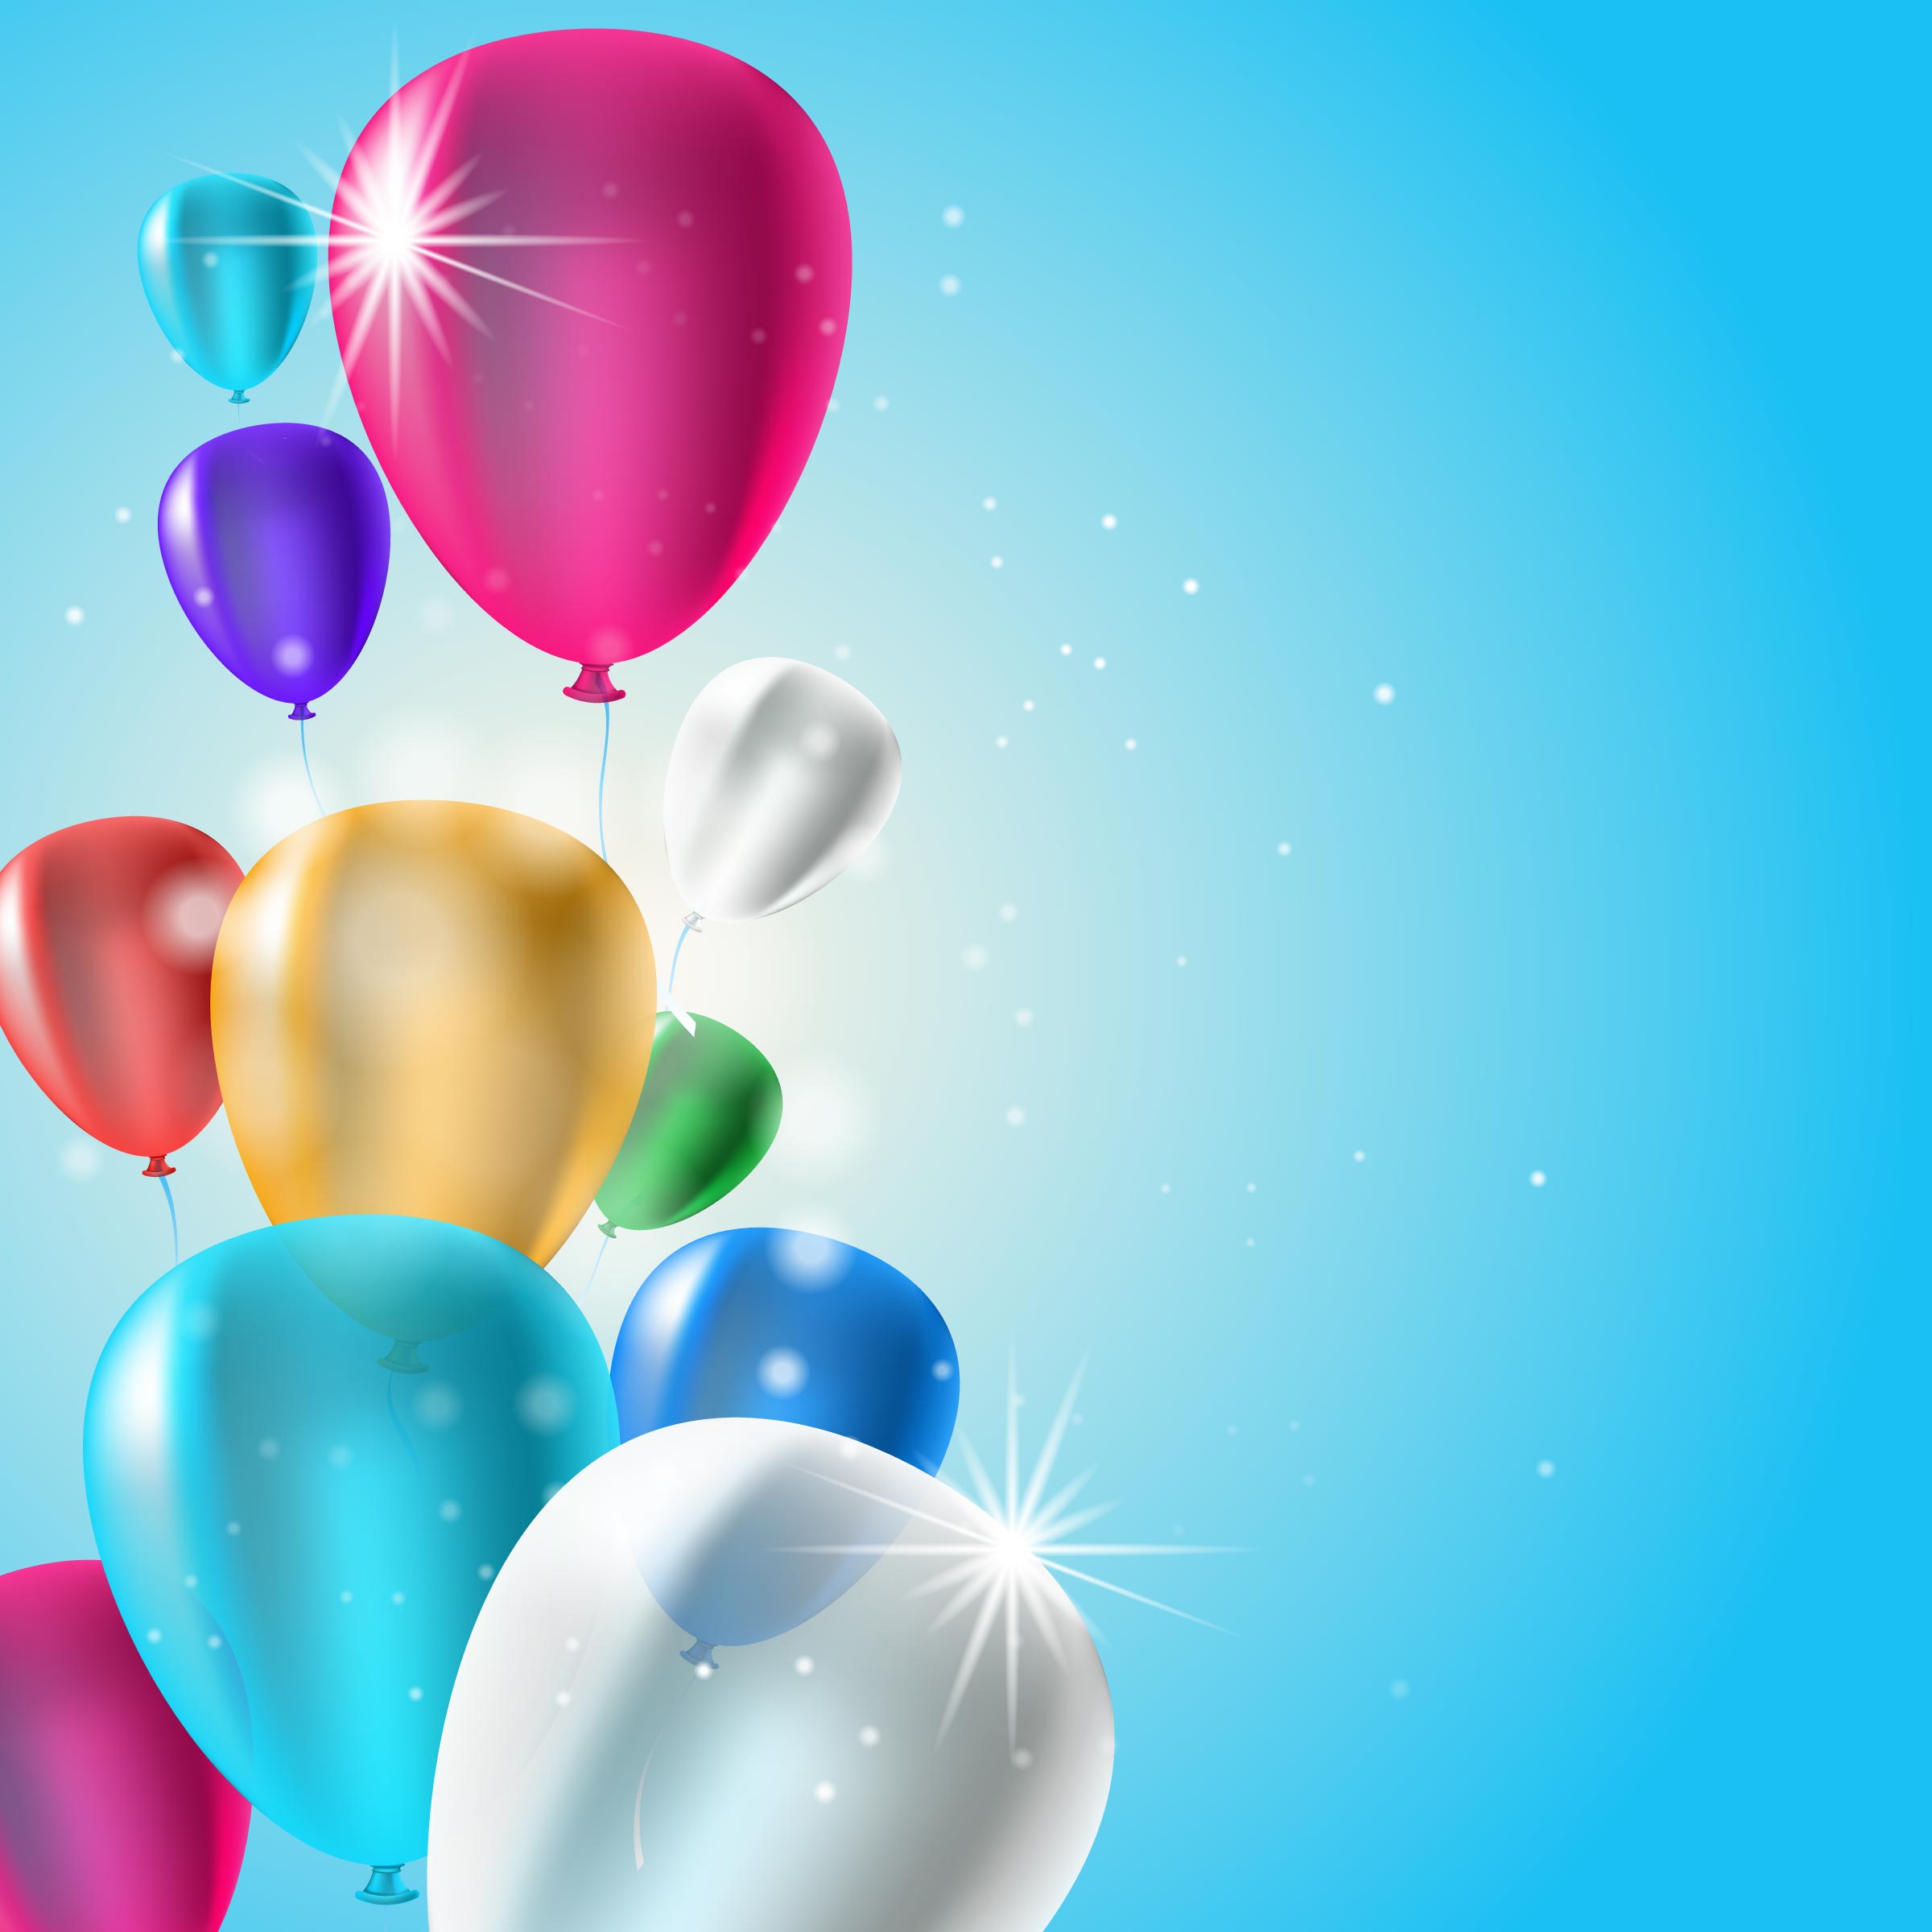 Birthday balloons background - Download Free Vectors ...